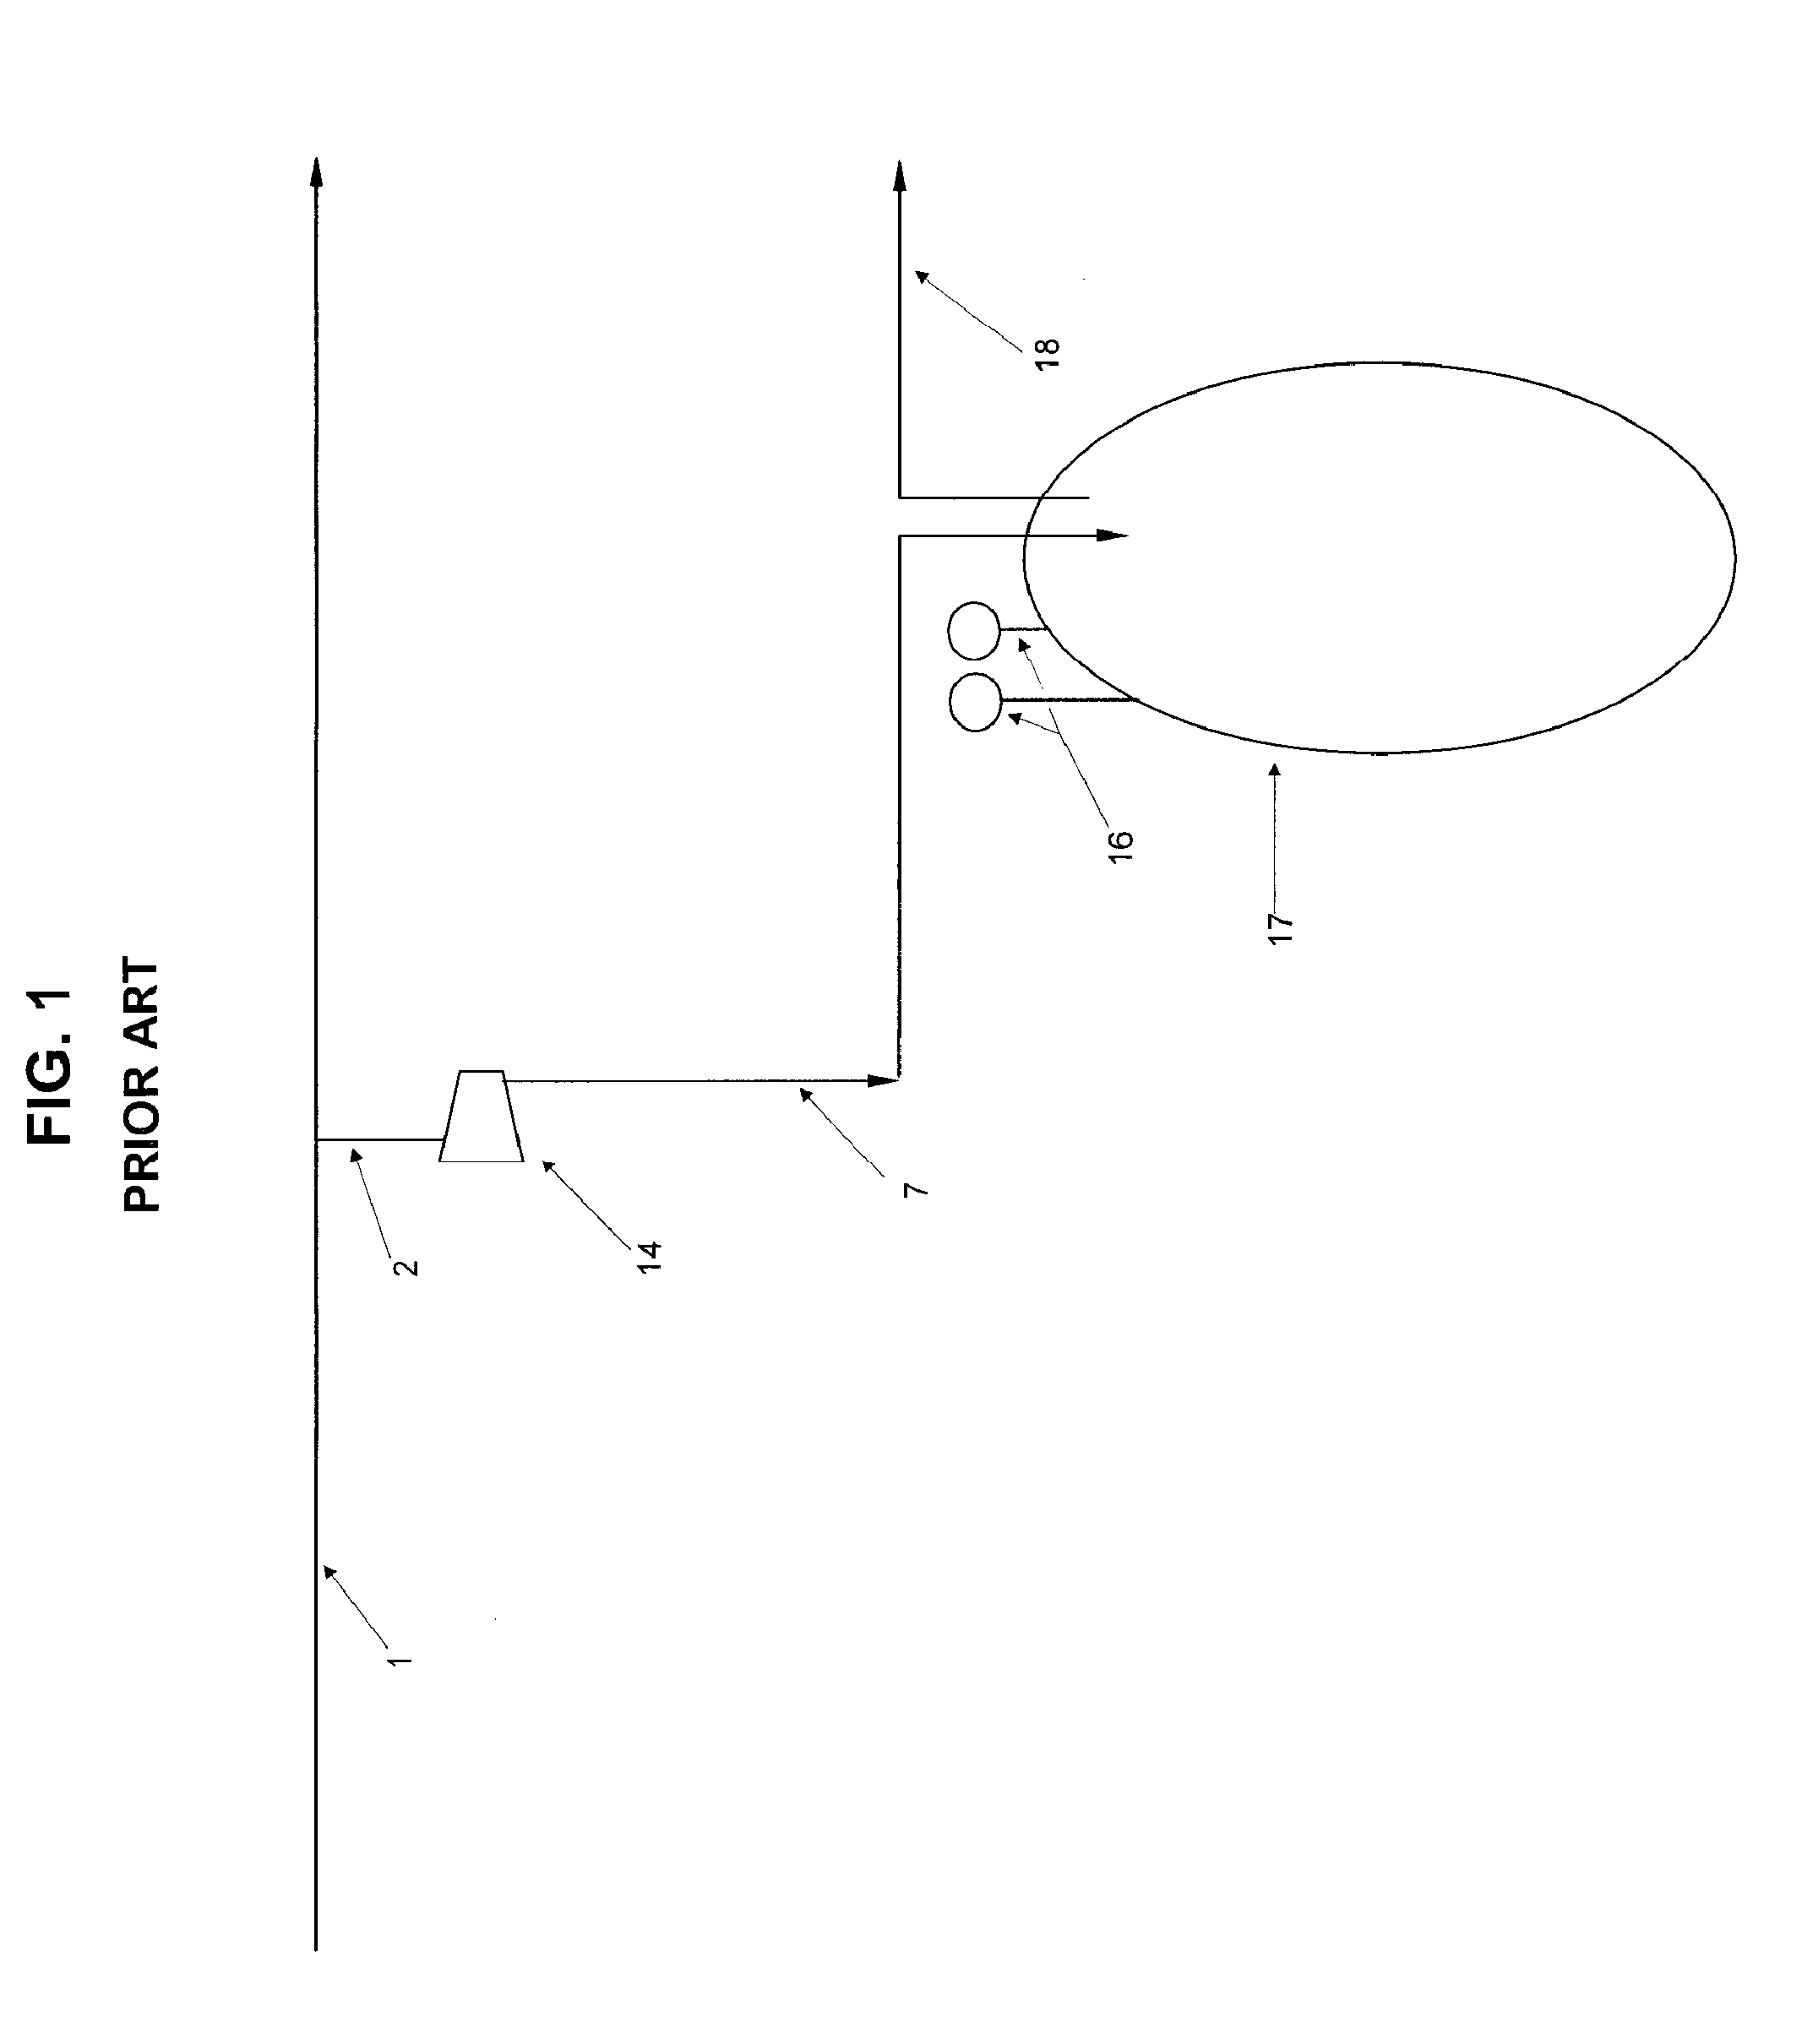 Method to increase storage capacity of natural gas storage caverns with a refrigeration system